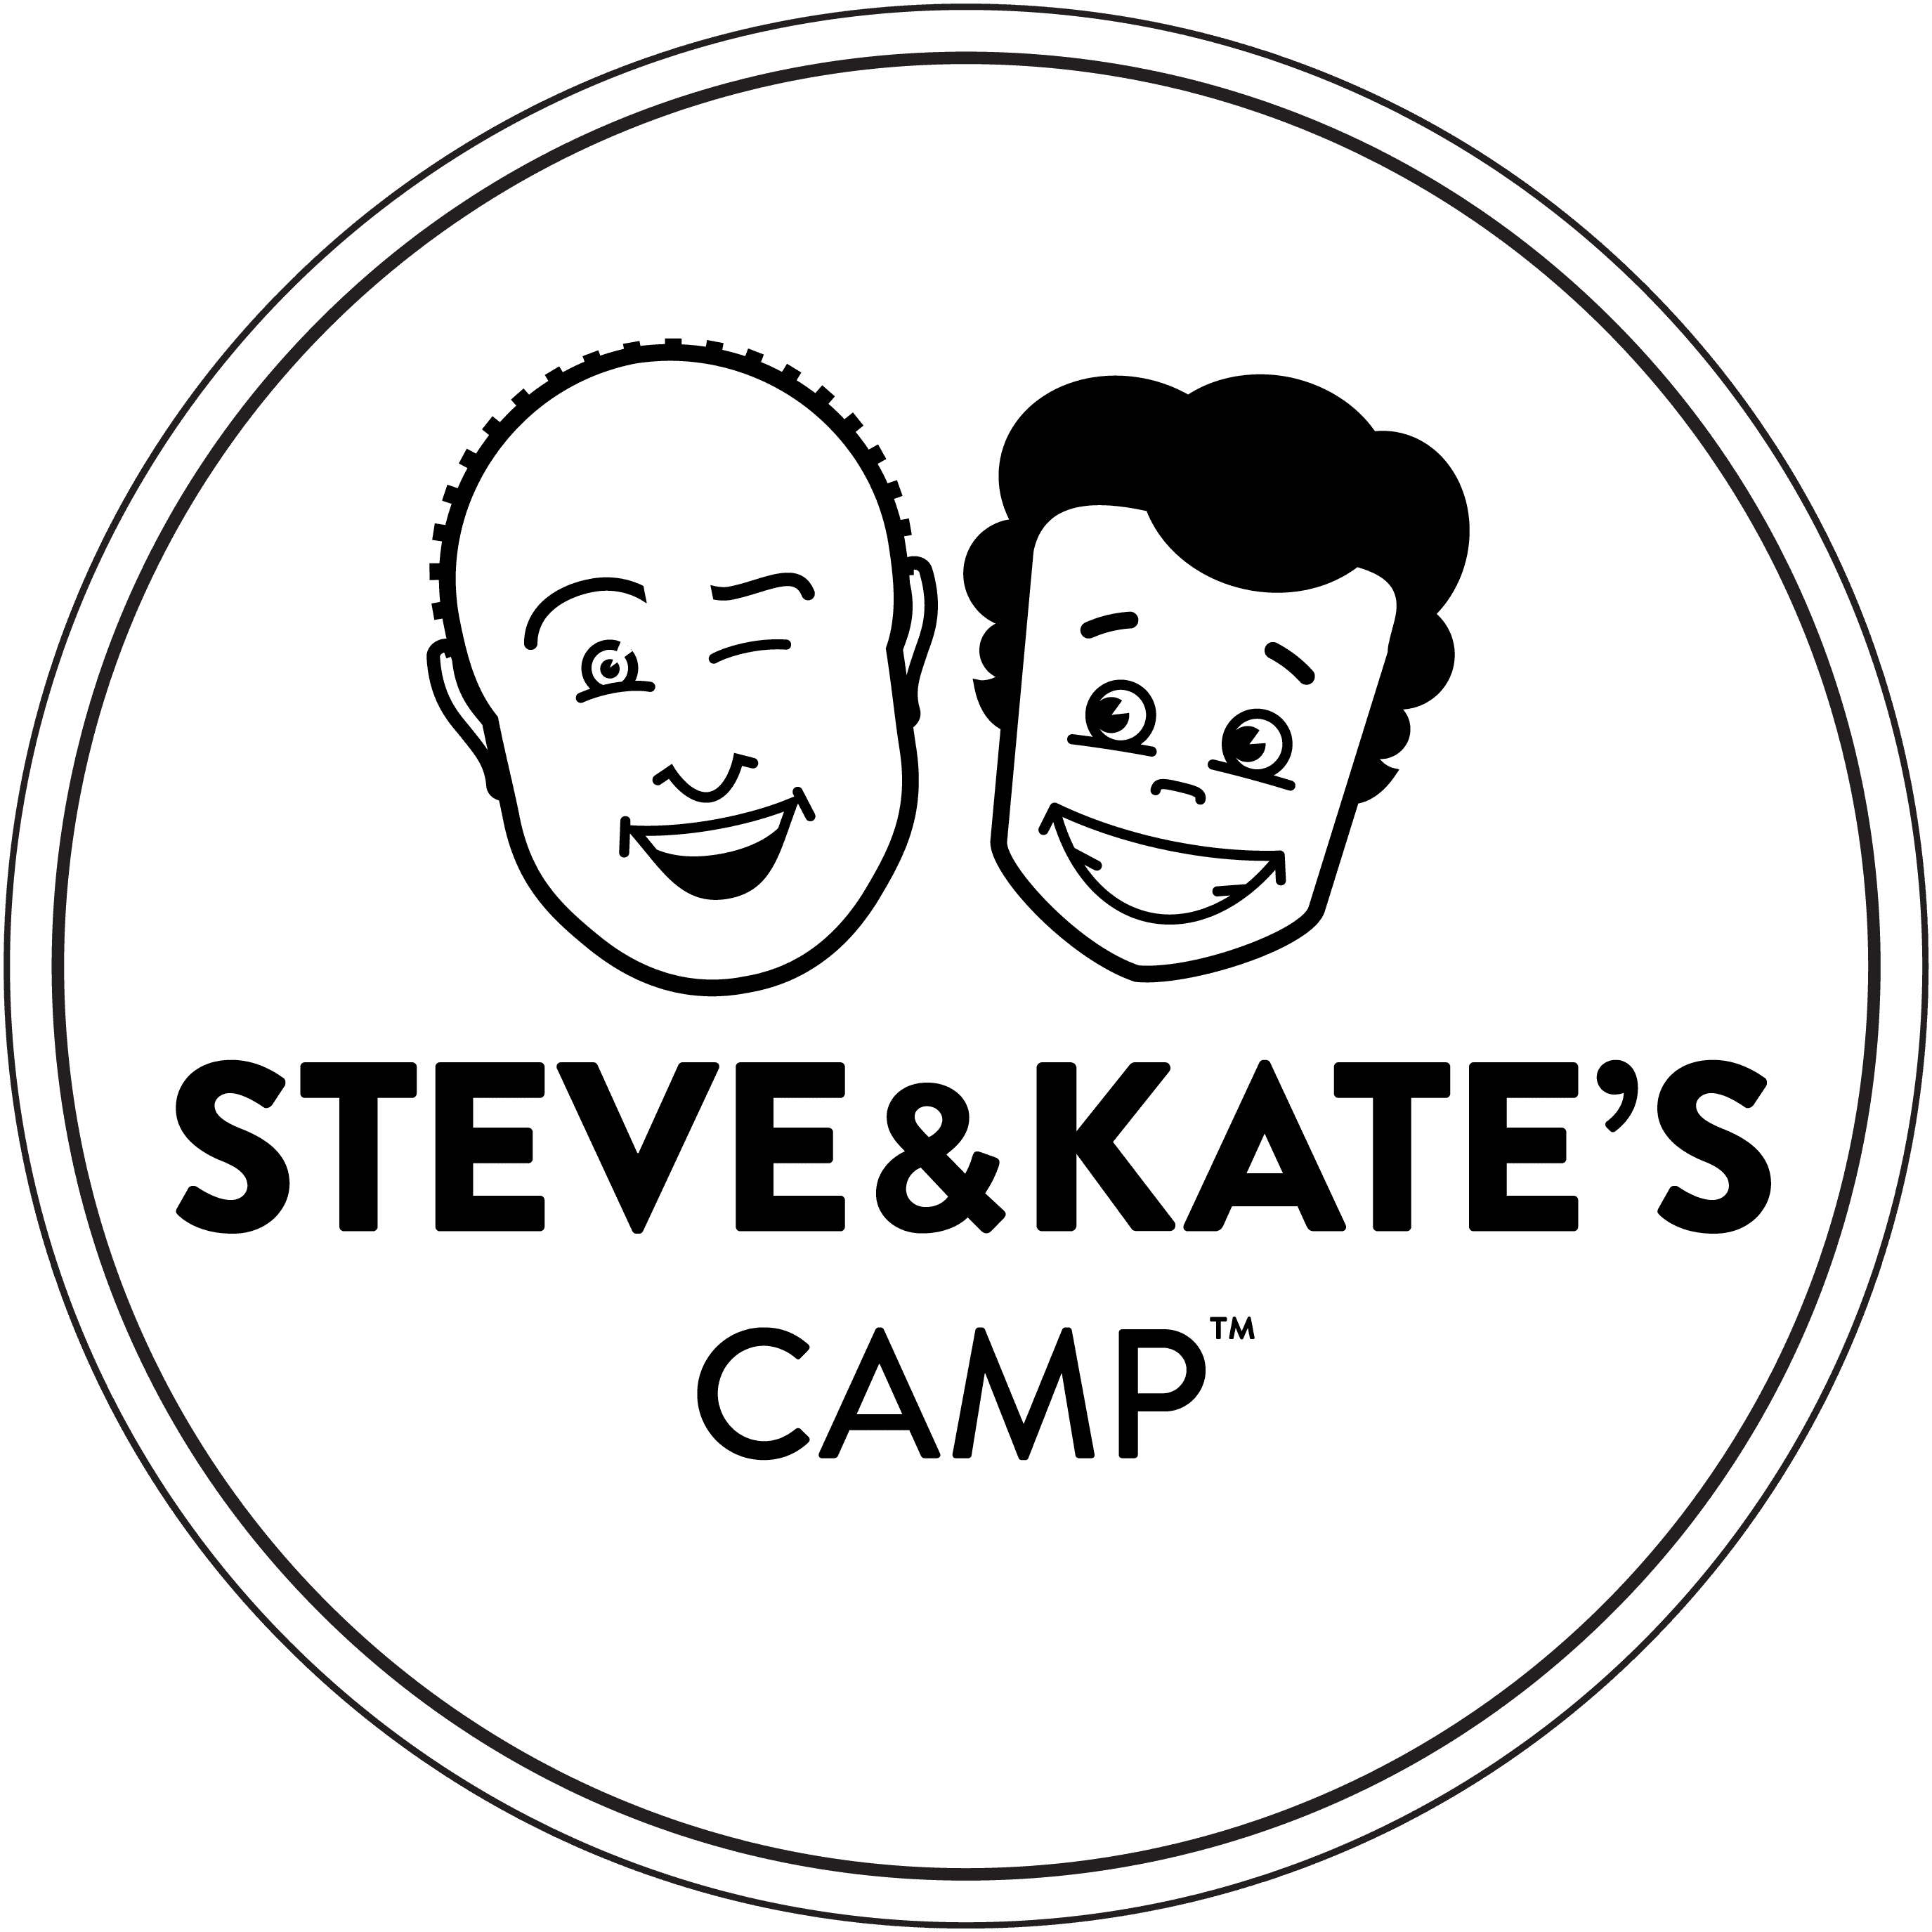 Win one free week of Steve & Kate’s Camp for Summer 2017!